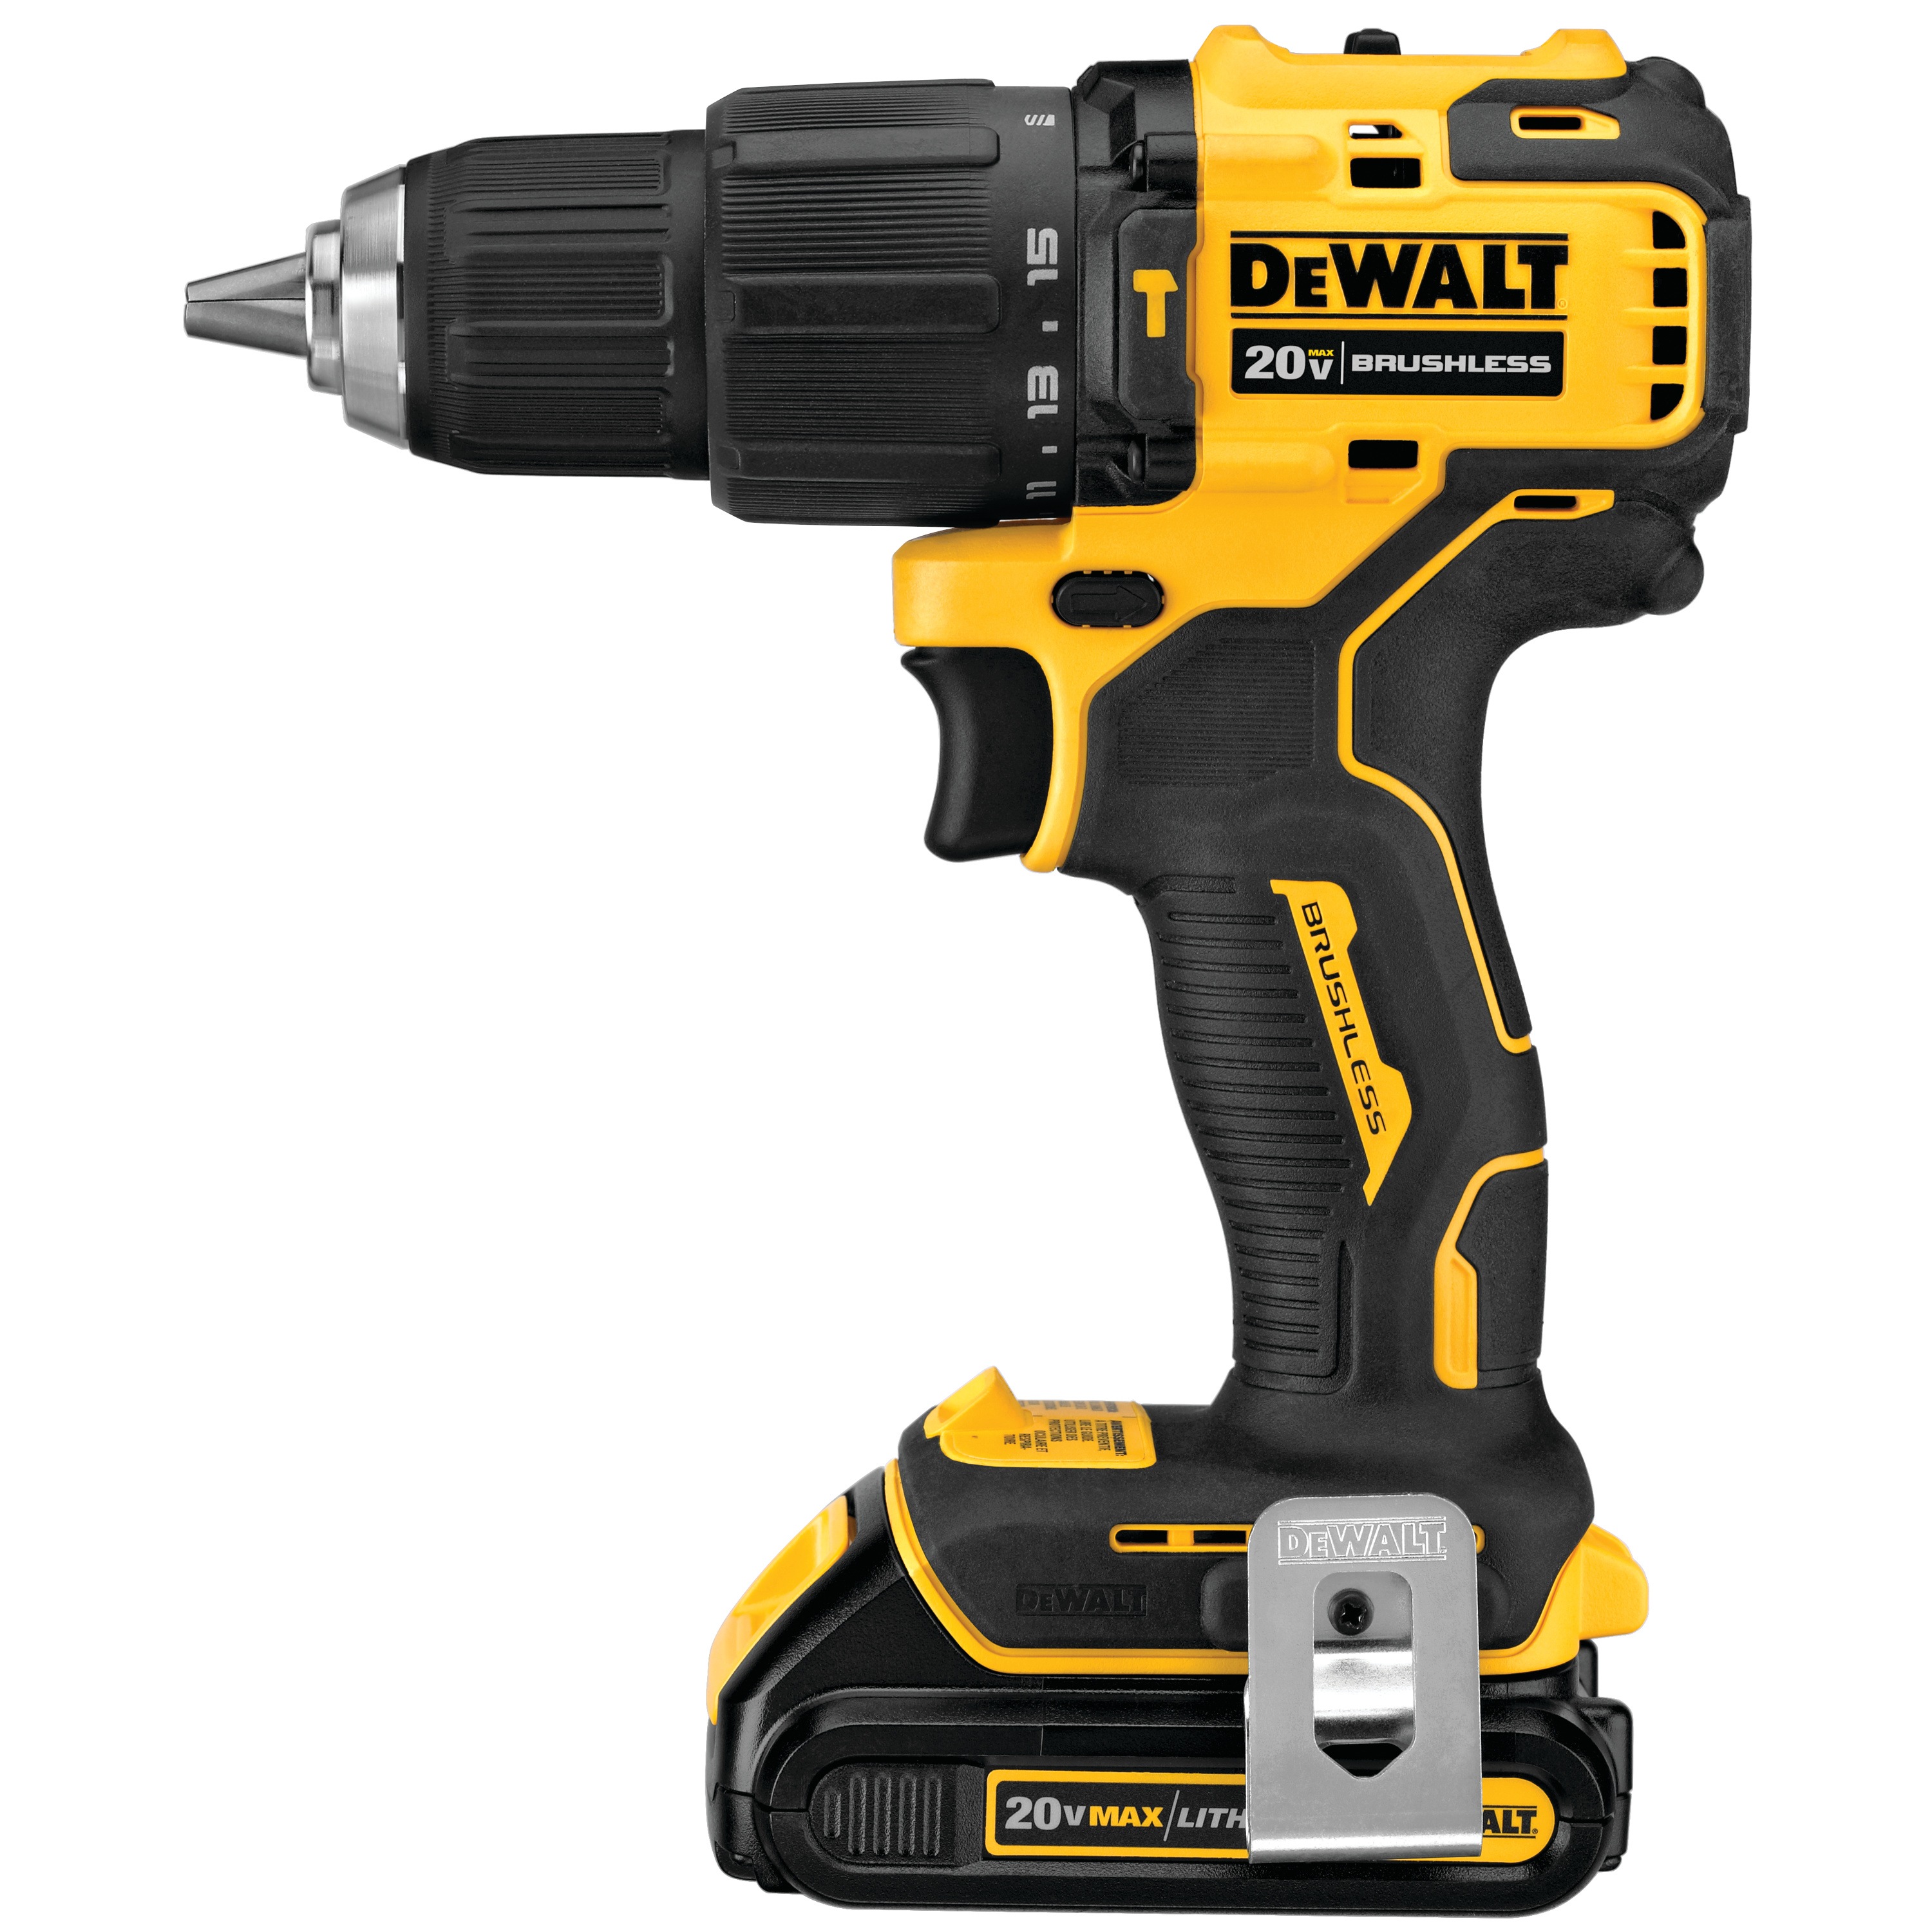 Profile of Atomic brushless compact cordless half inch hammer drill driver.